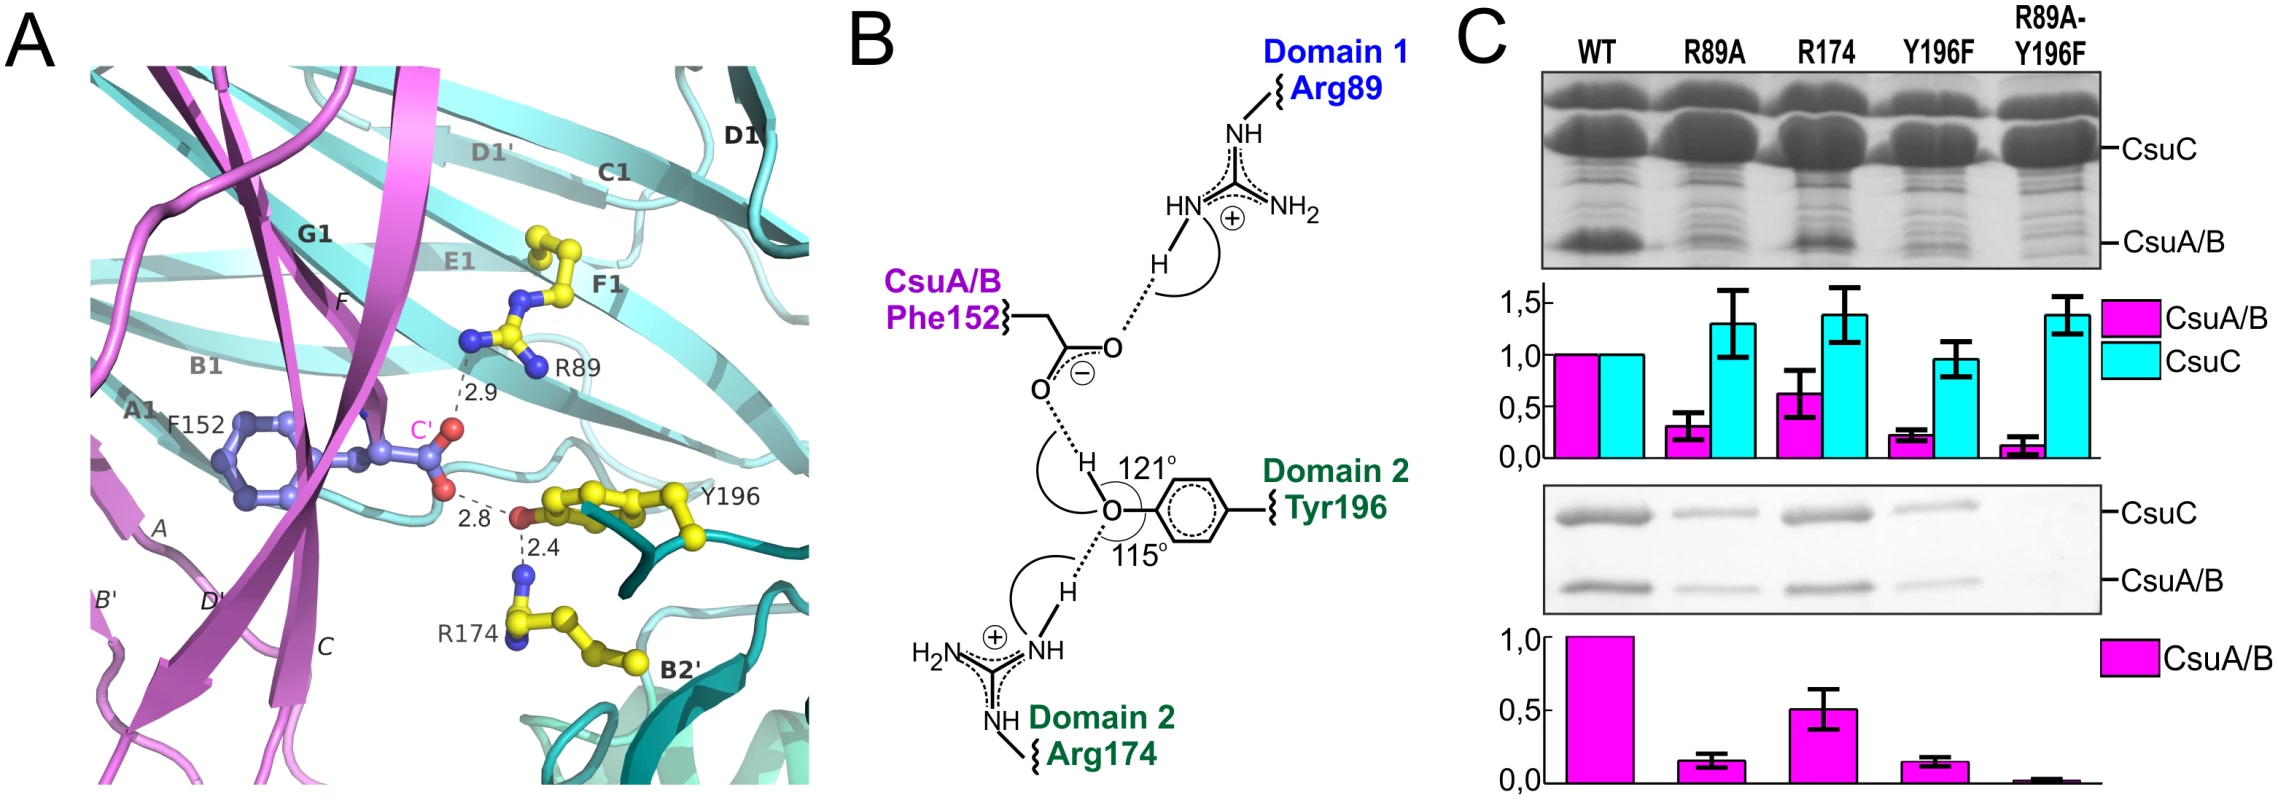 Network of ionic-hydrogen bonds anchoring the C-terminal carboxylate of CsuA/B in the inter-domain cleft of CsuC is essential for the complex formation.